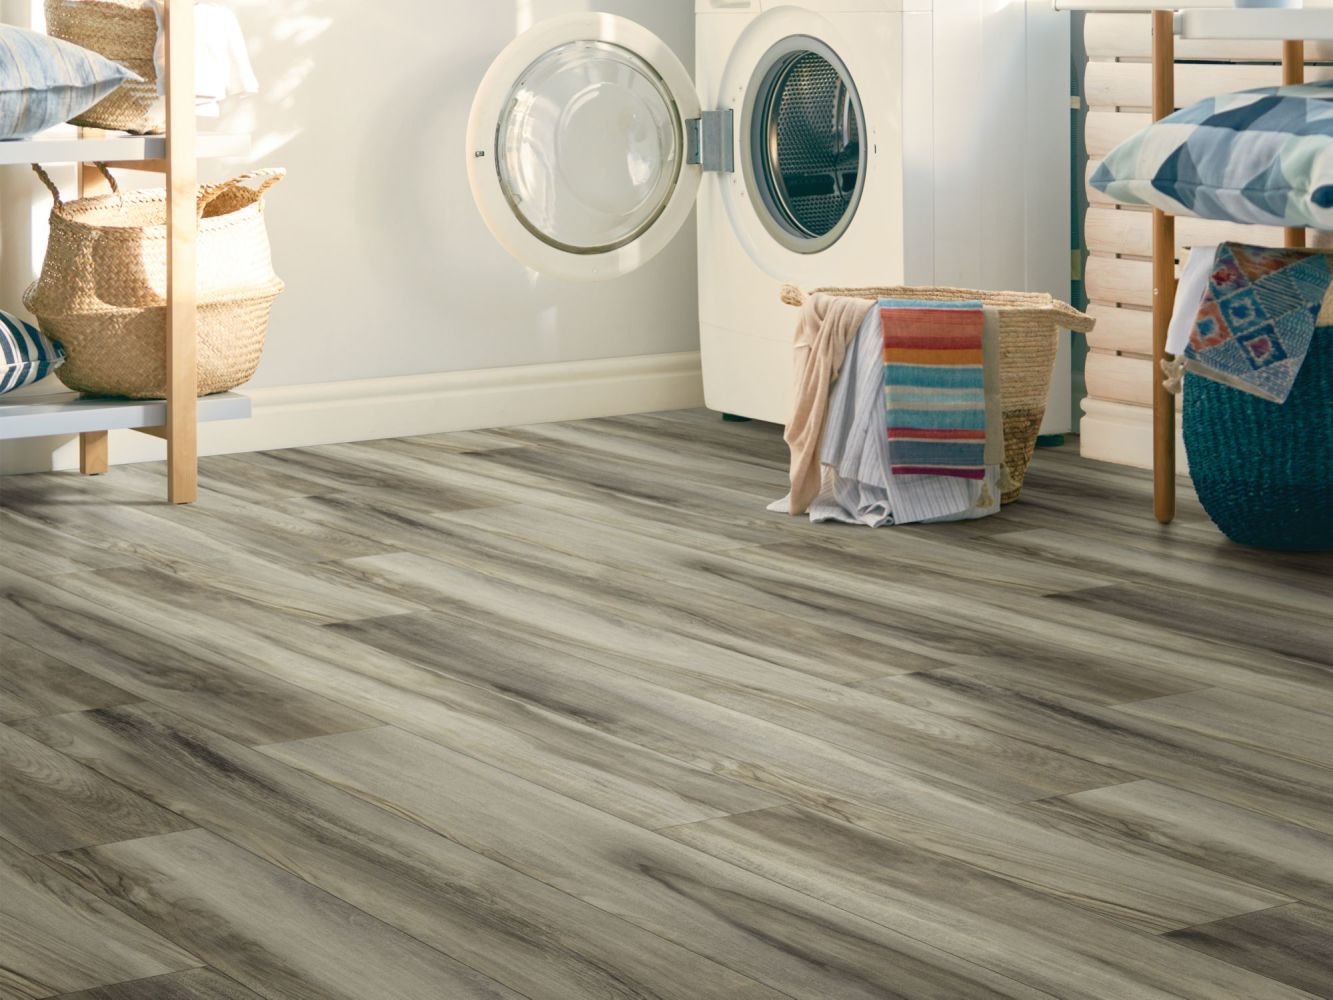 Shaw Floors Resilient Residential Cottage Chic Hartel 00590_1048V